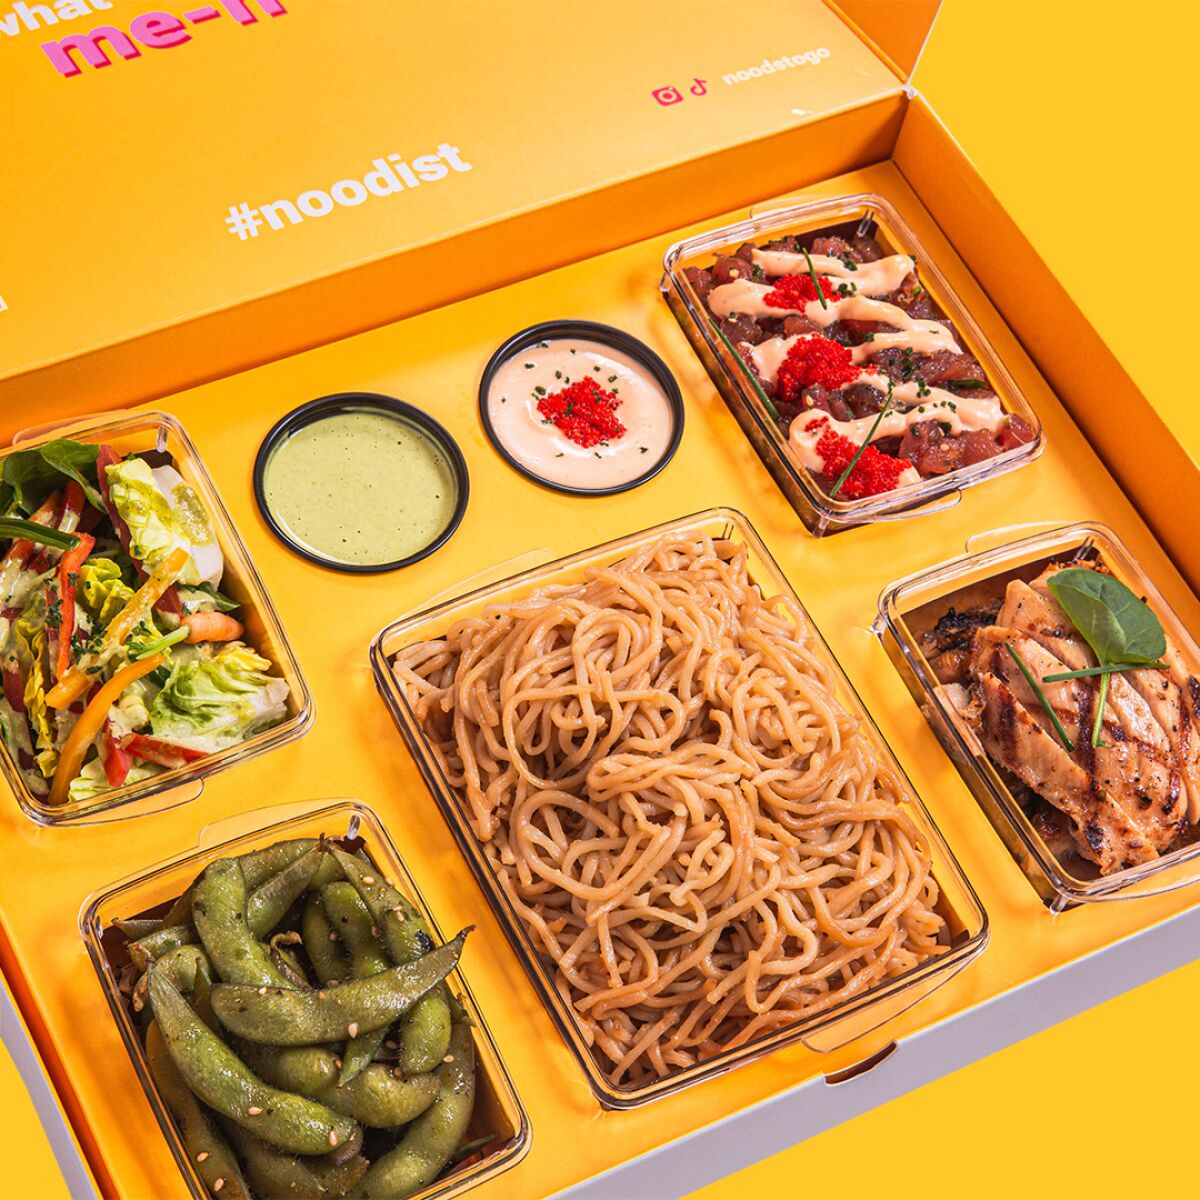 Noods’ takeout and delivery will include garlic noodles and sides including tuna tartare and chili chicken wings.